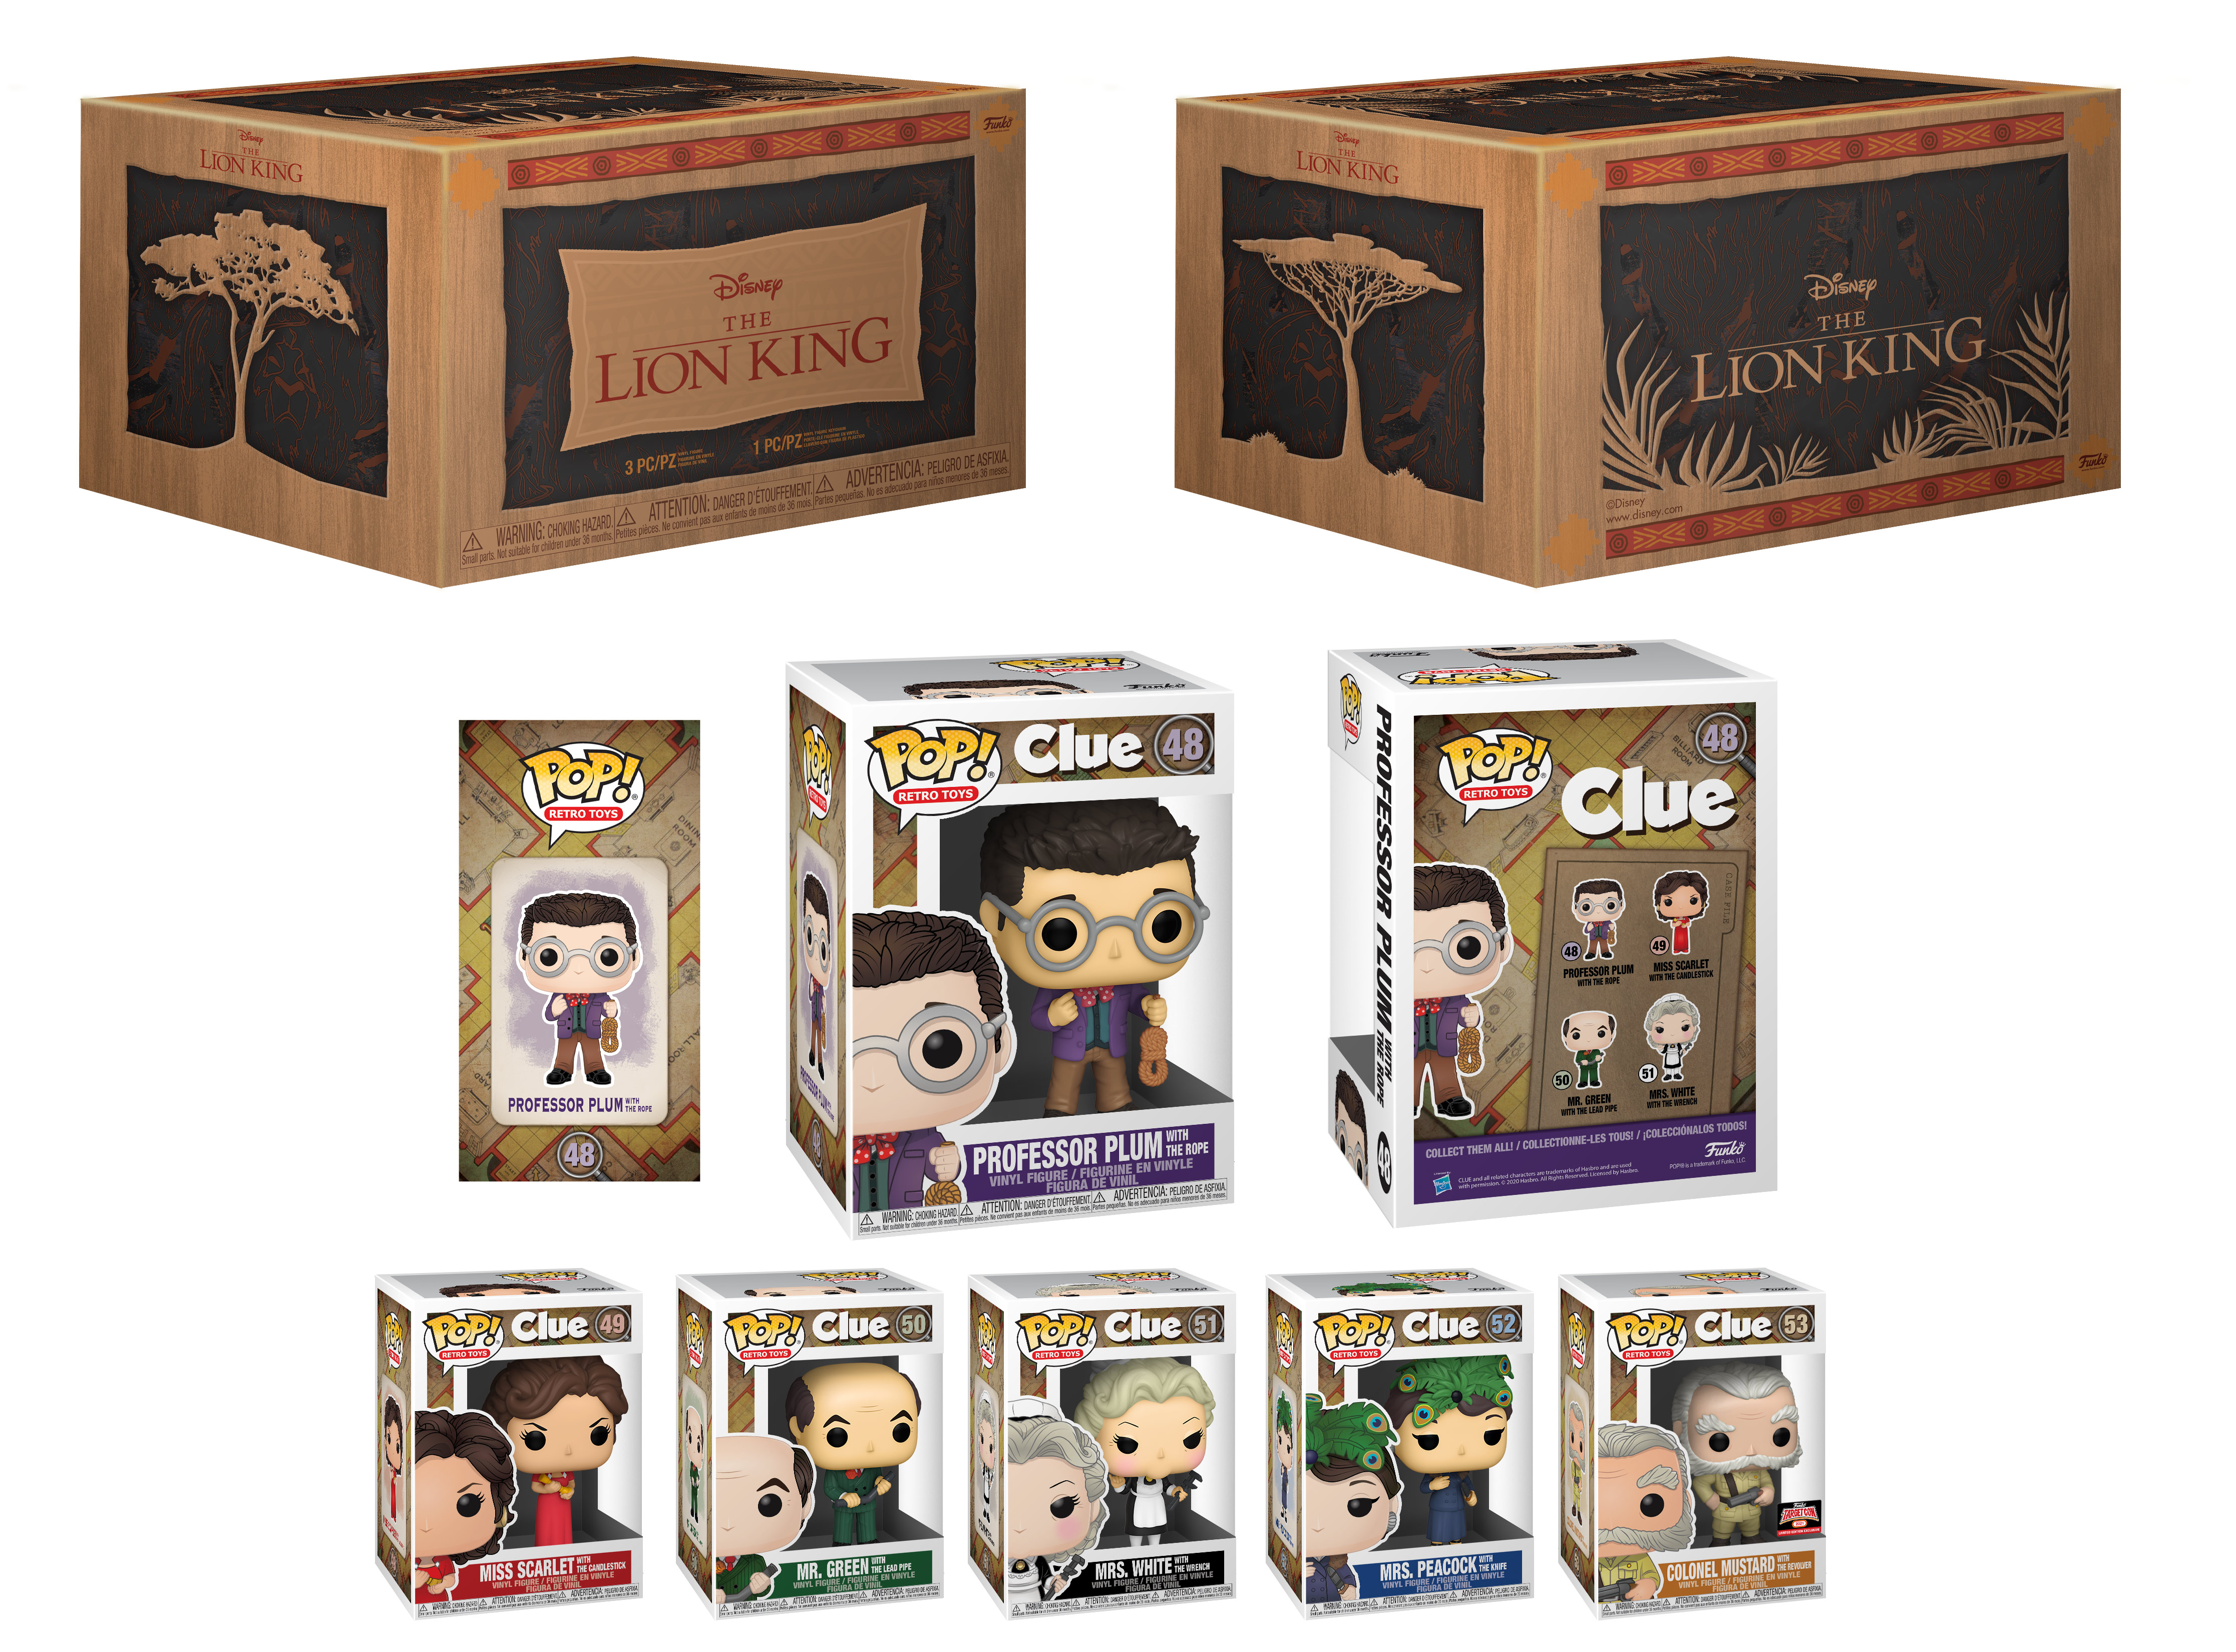 The Lion King Box and Various Pop! Clue Collectibles in Box